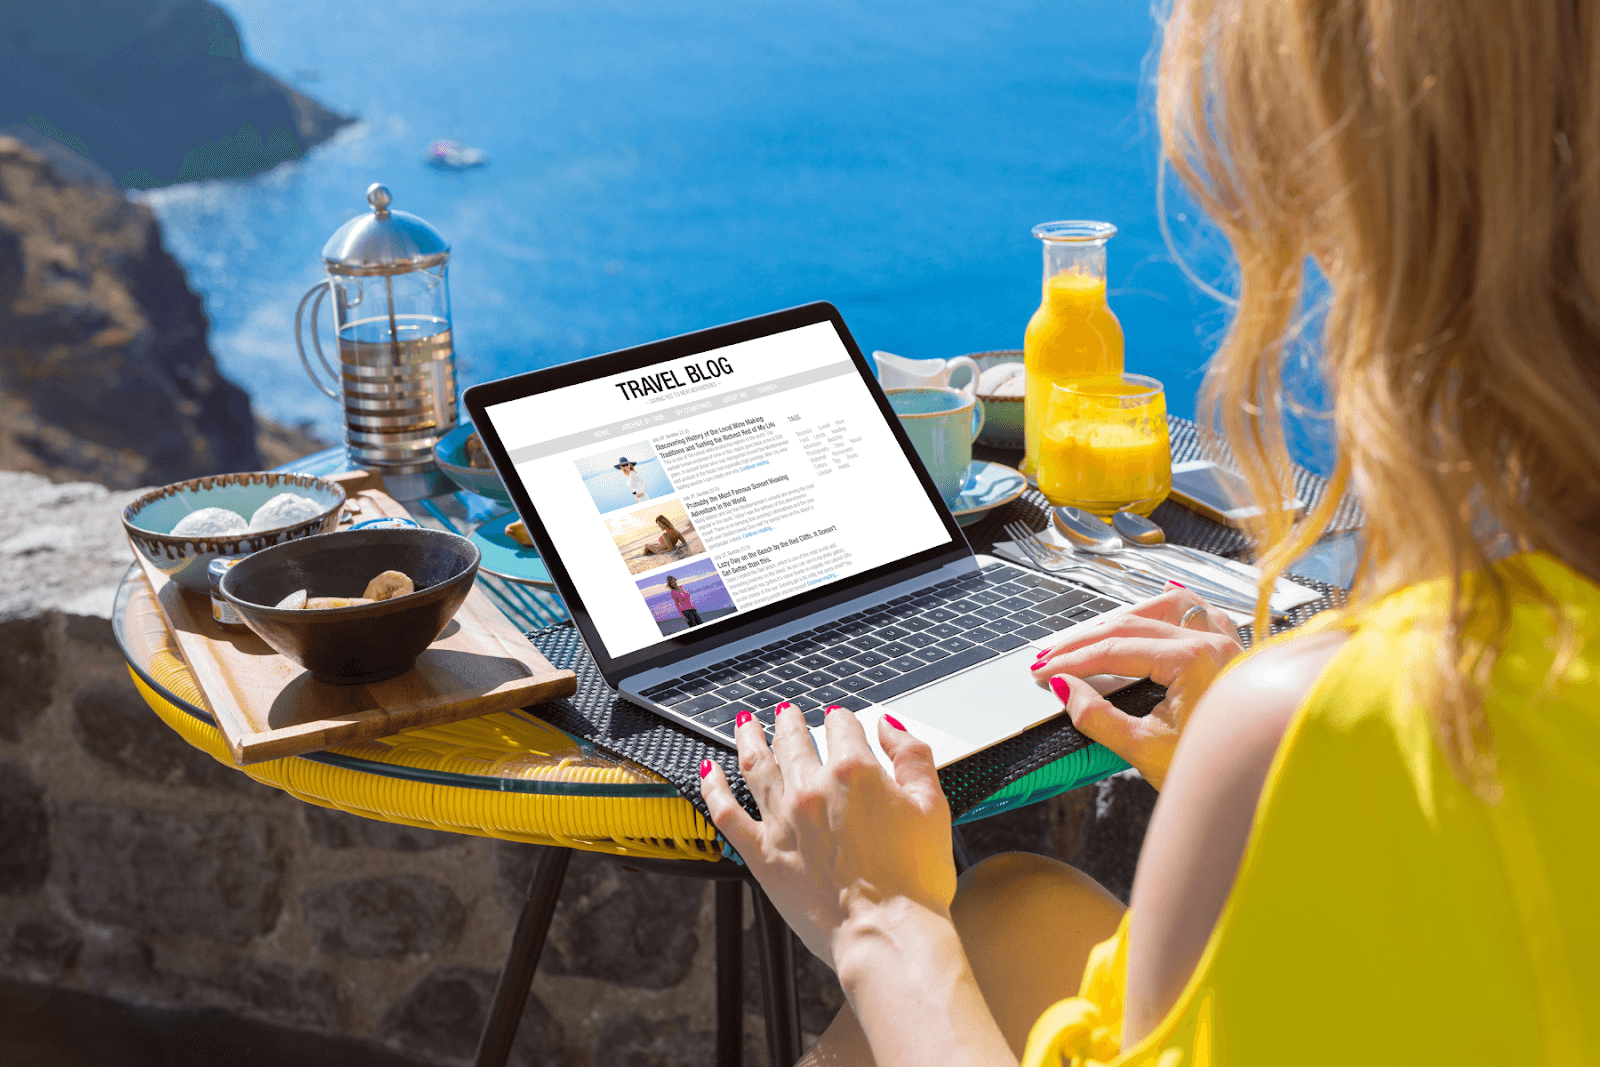 The photo displays a woman sitting at a small table with food, drinks, and a laptop. She is working on her travel blog as she overlooks a beautiful cliffside before plunging below into the ocean. A catamaran is in the distance floating on the water.